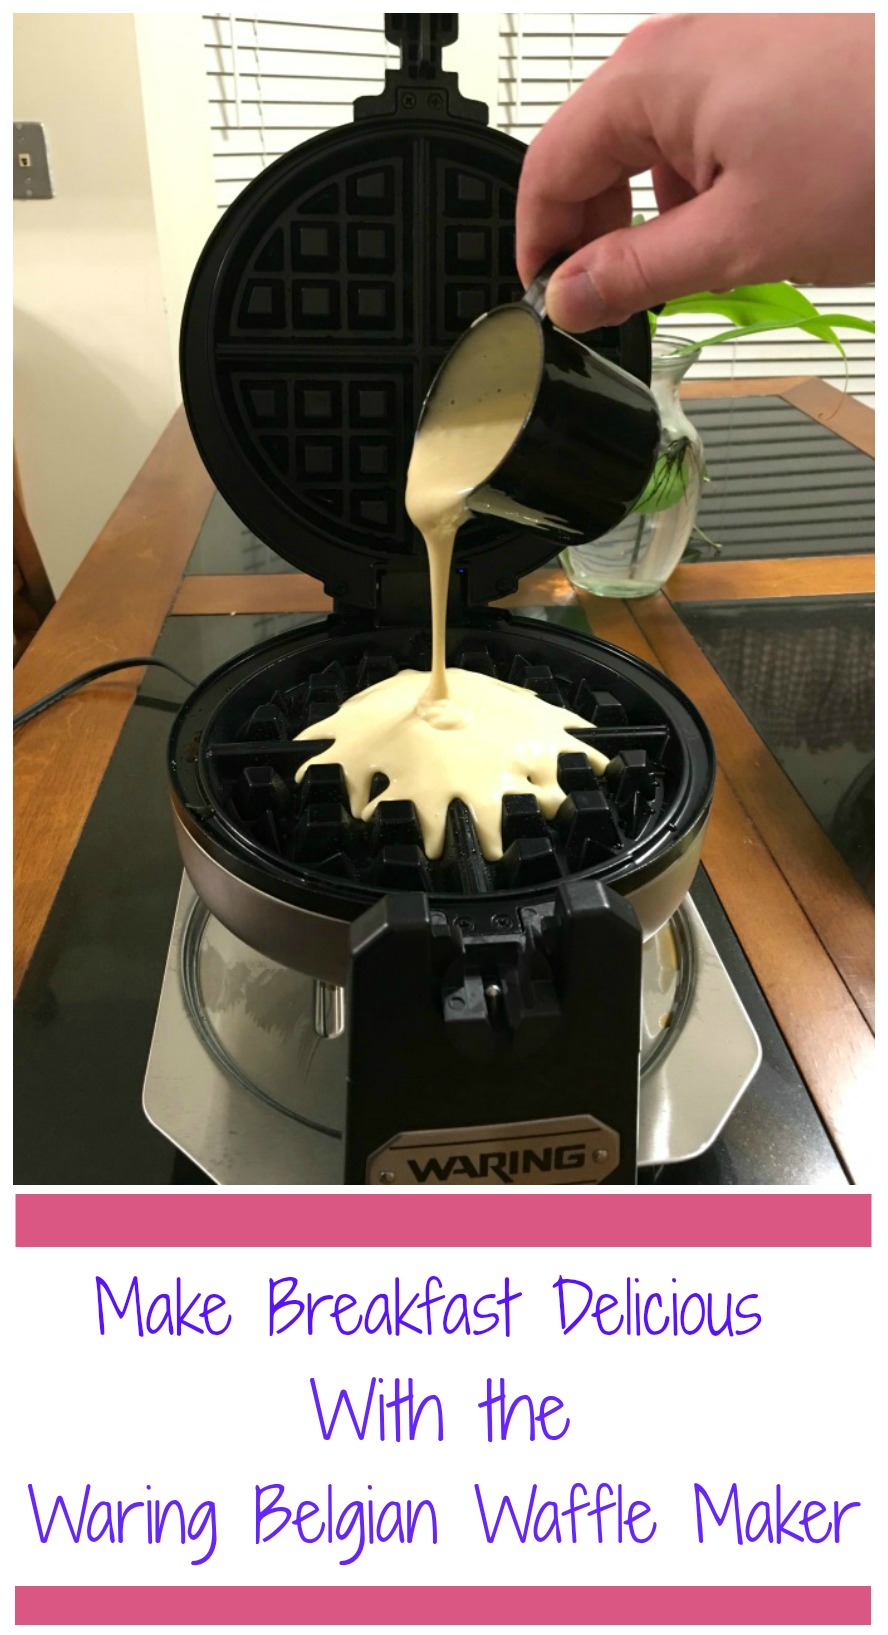 Make Breakfast Delicious with the Waring Belgian Waffle Maker